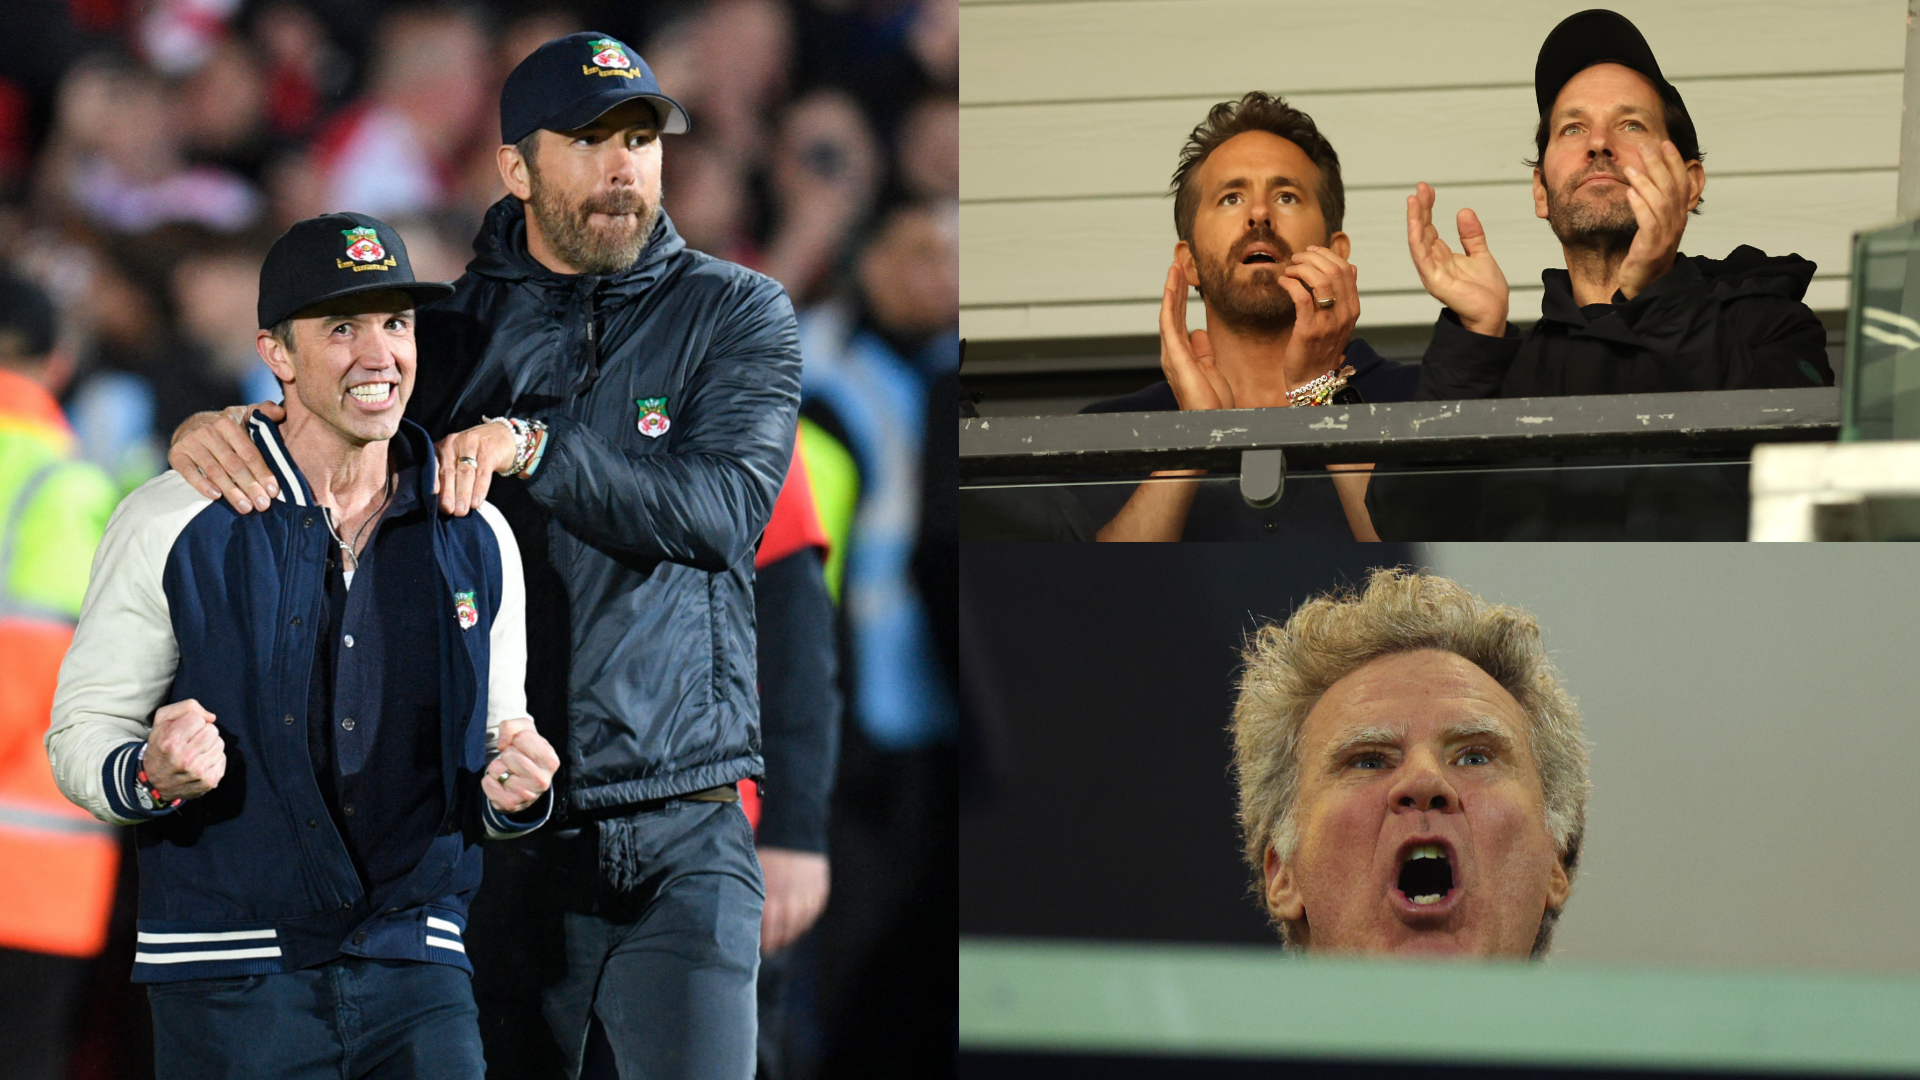 ‘Hope not!’ - Paul Mullin reveals celebrity guest he wants to avoid at Wrexham after seeing Ryan Reynolds & Rob McElhenney invite Paul Rudd and Will Ferrell to SToK Racecourse